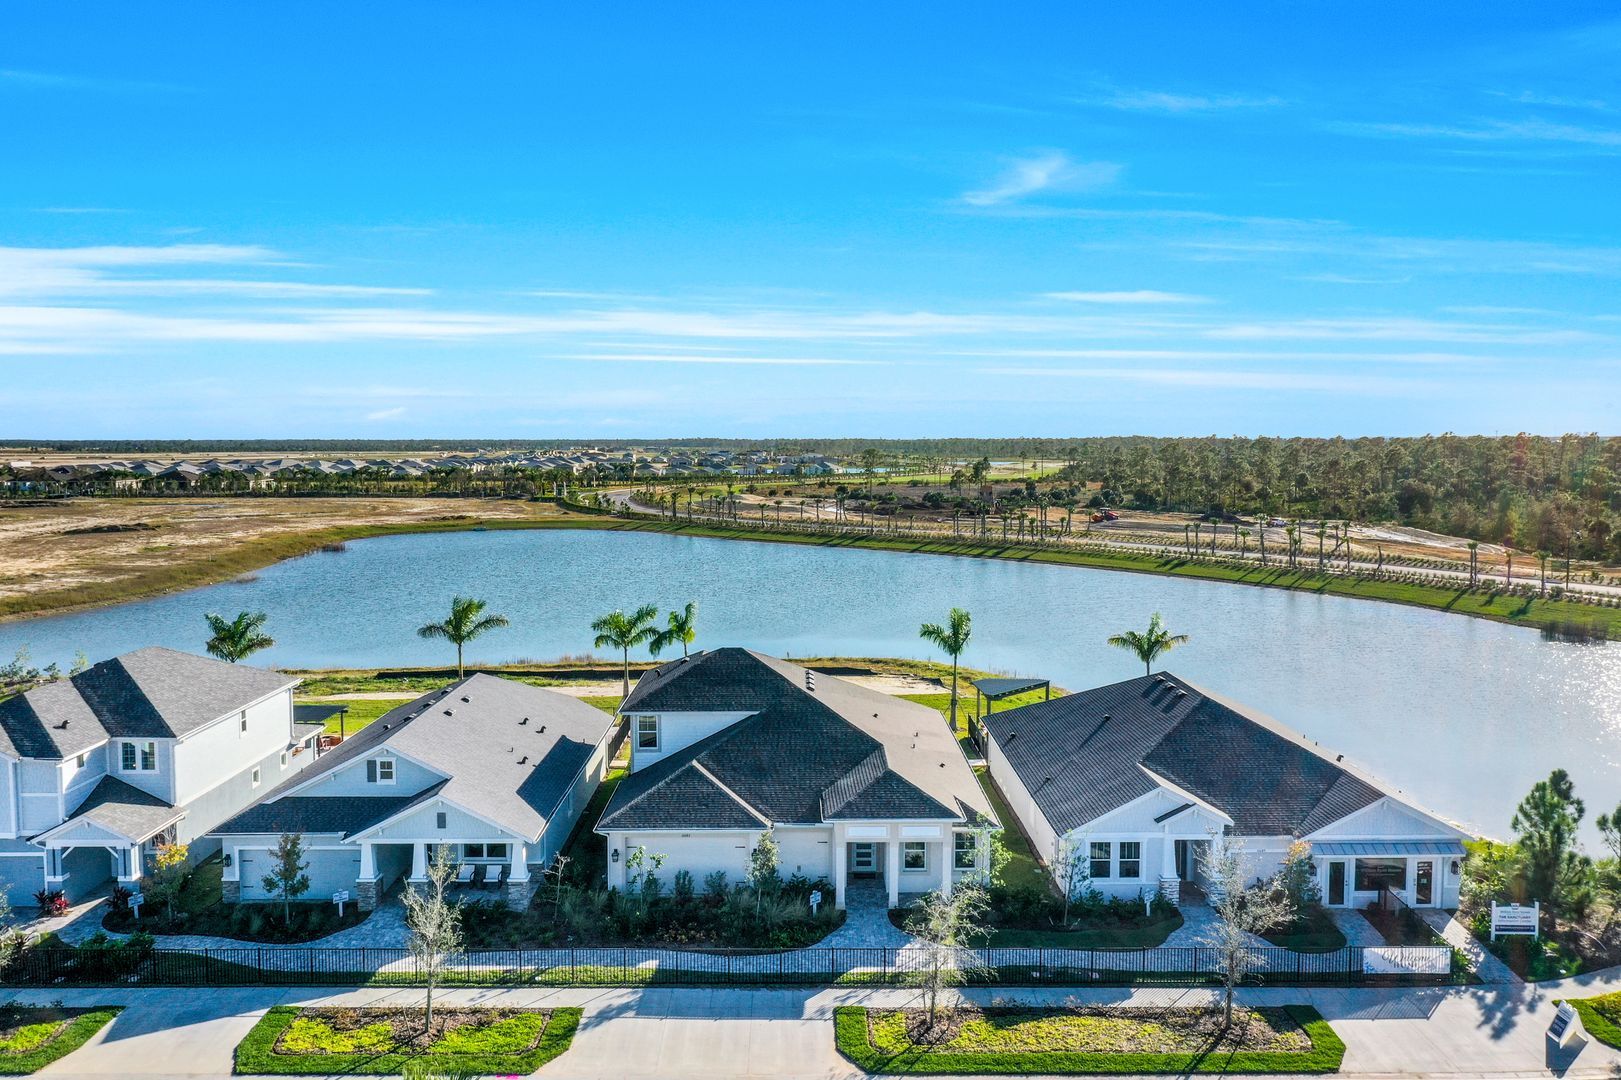 The Sanctuary - Model Homes:New home construction Punta Gorda, FL. New Homes in Southwest Florida. William Ryan Homes Available Quick Move in Homes For Sale